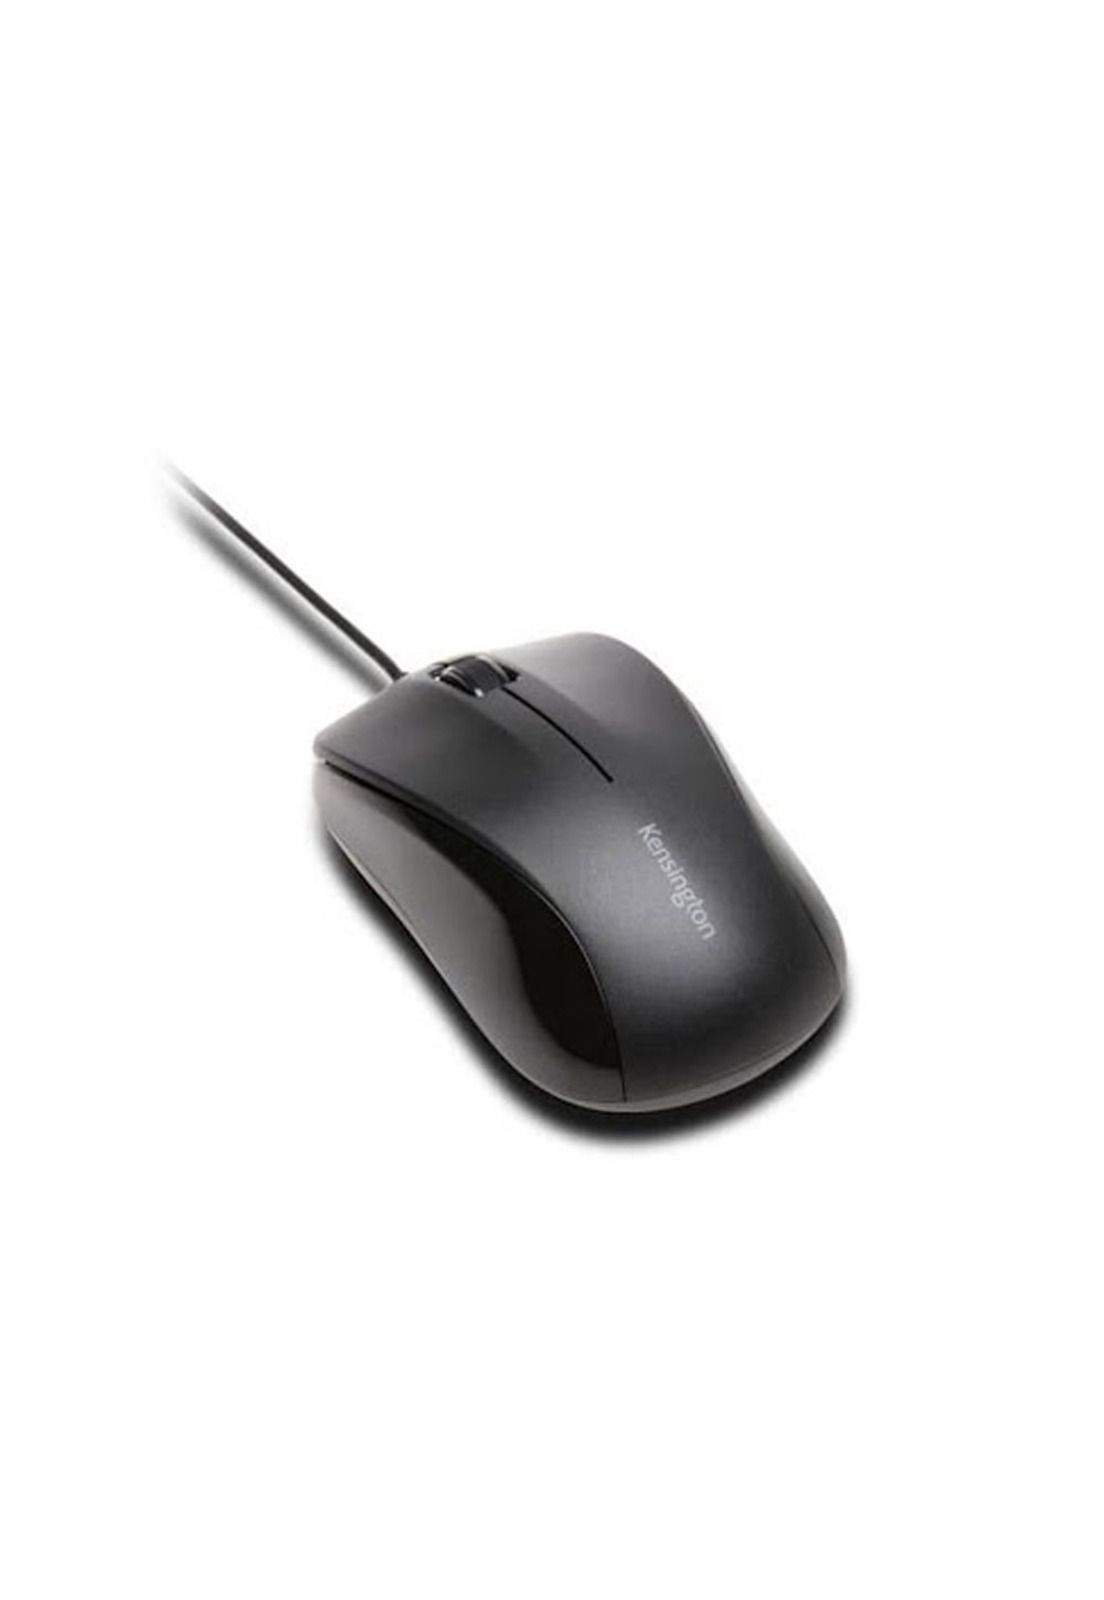 Mouse Wired USB Kensington For Life K72110